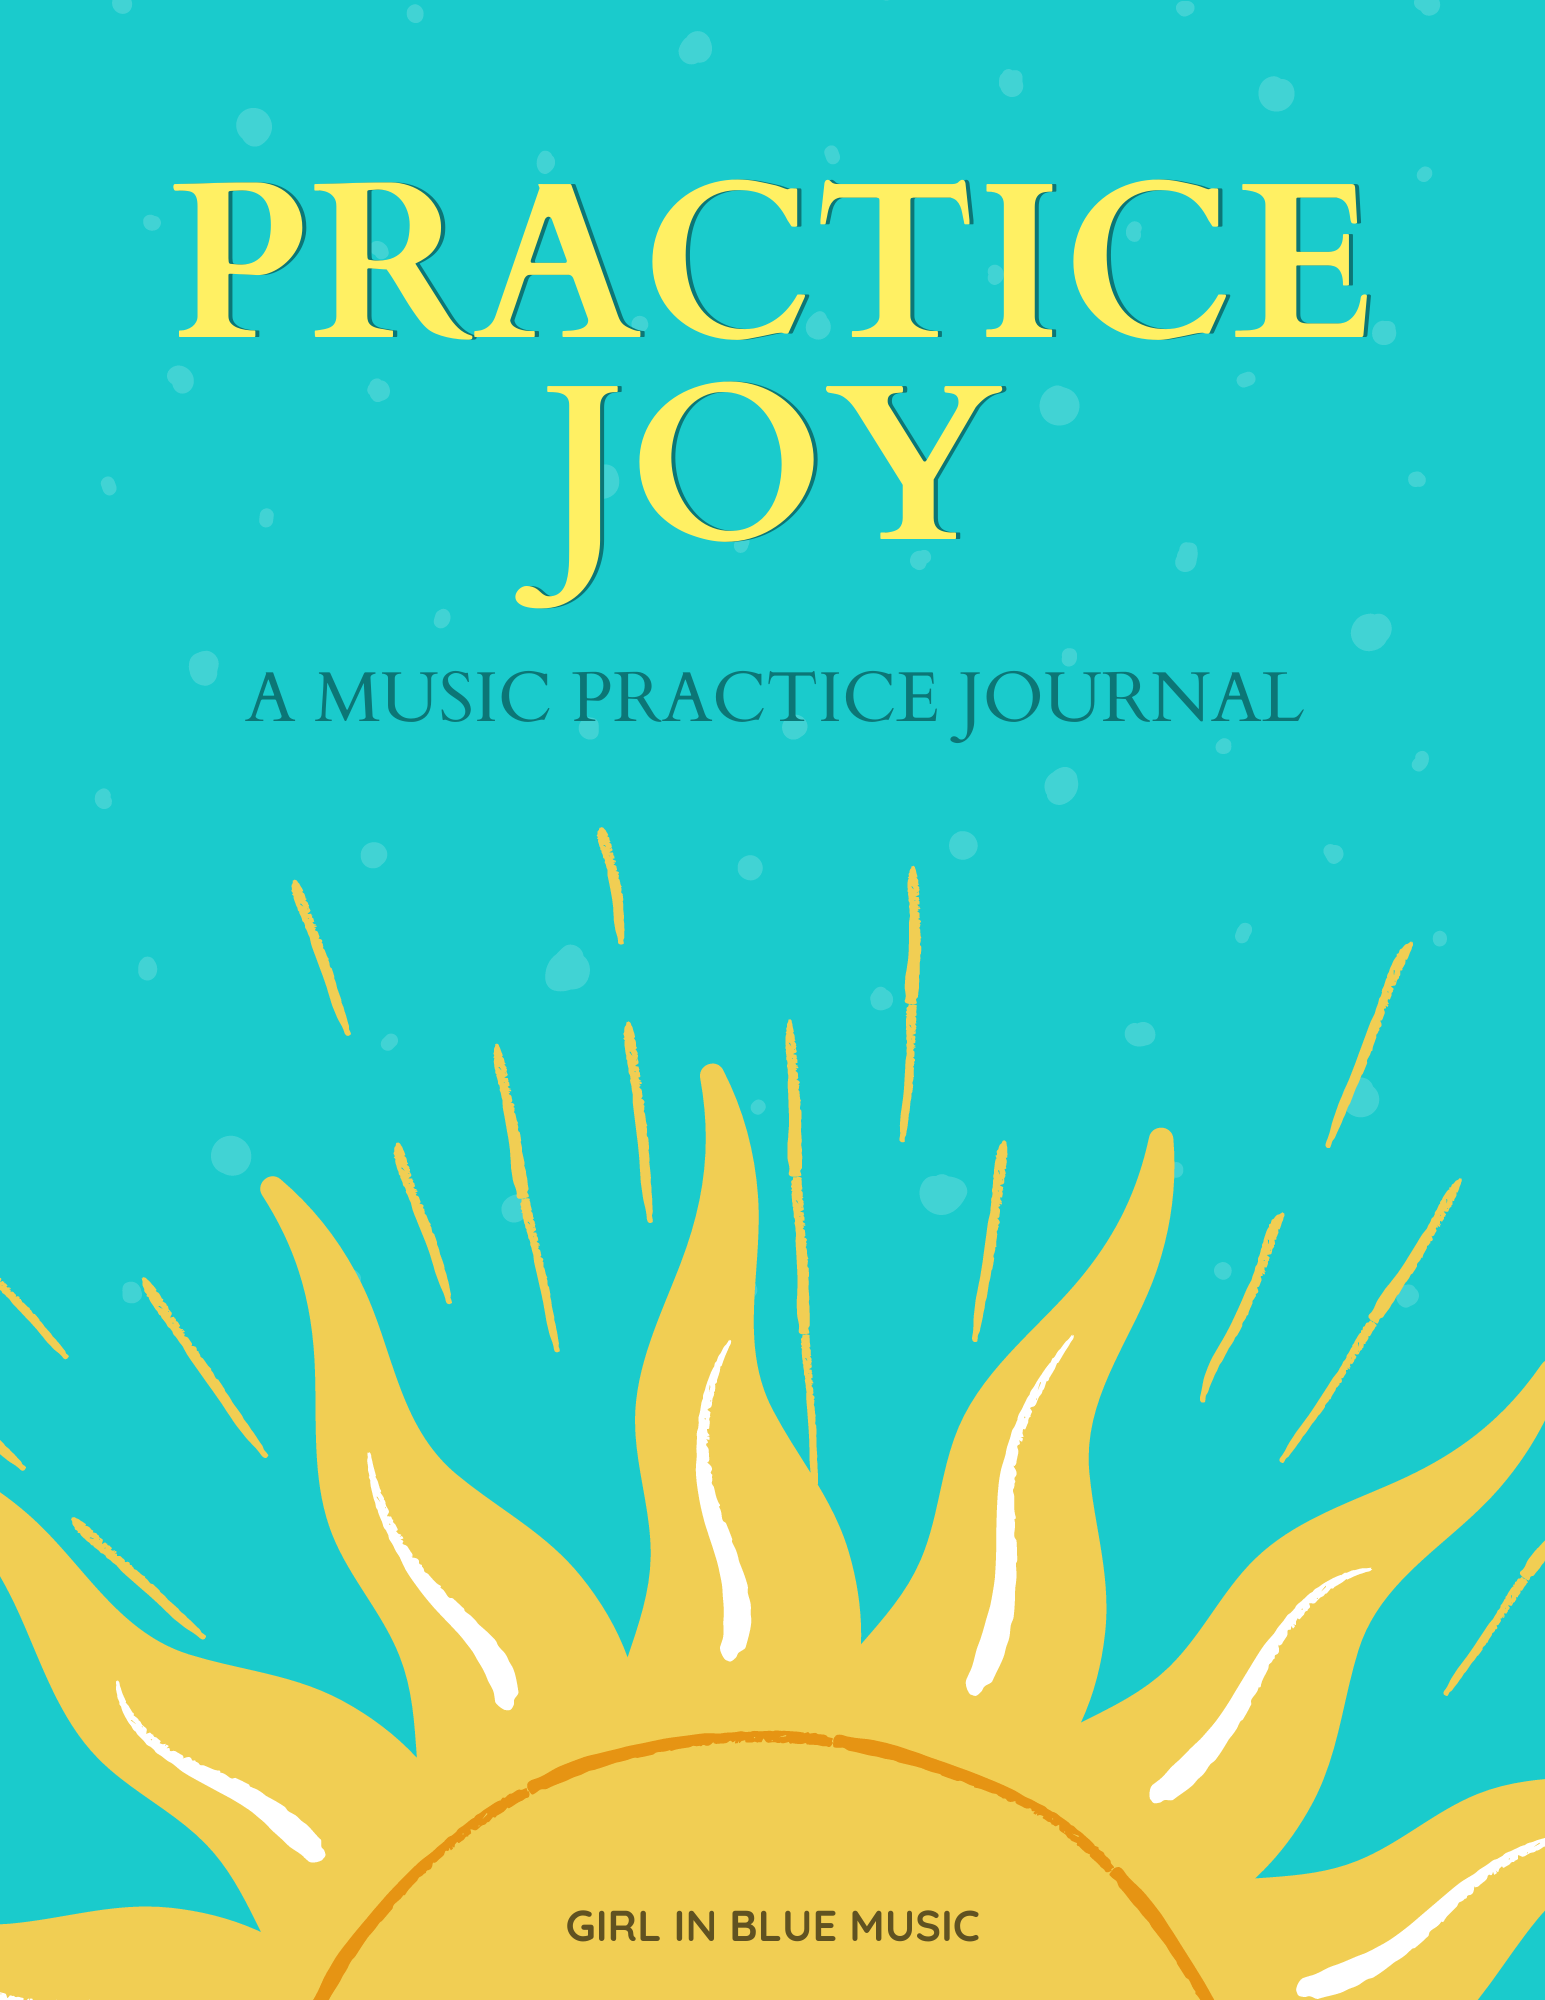 Cover of Practice Joy: A Music Practice Journal.

Blue background with a sun at the bottom